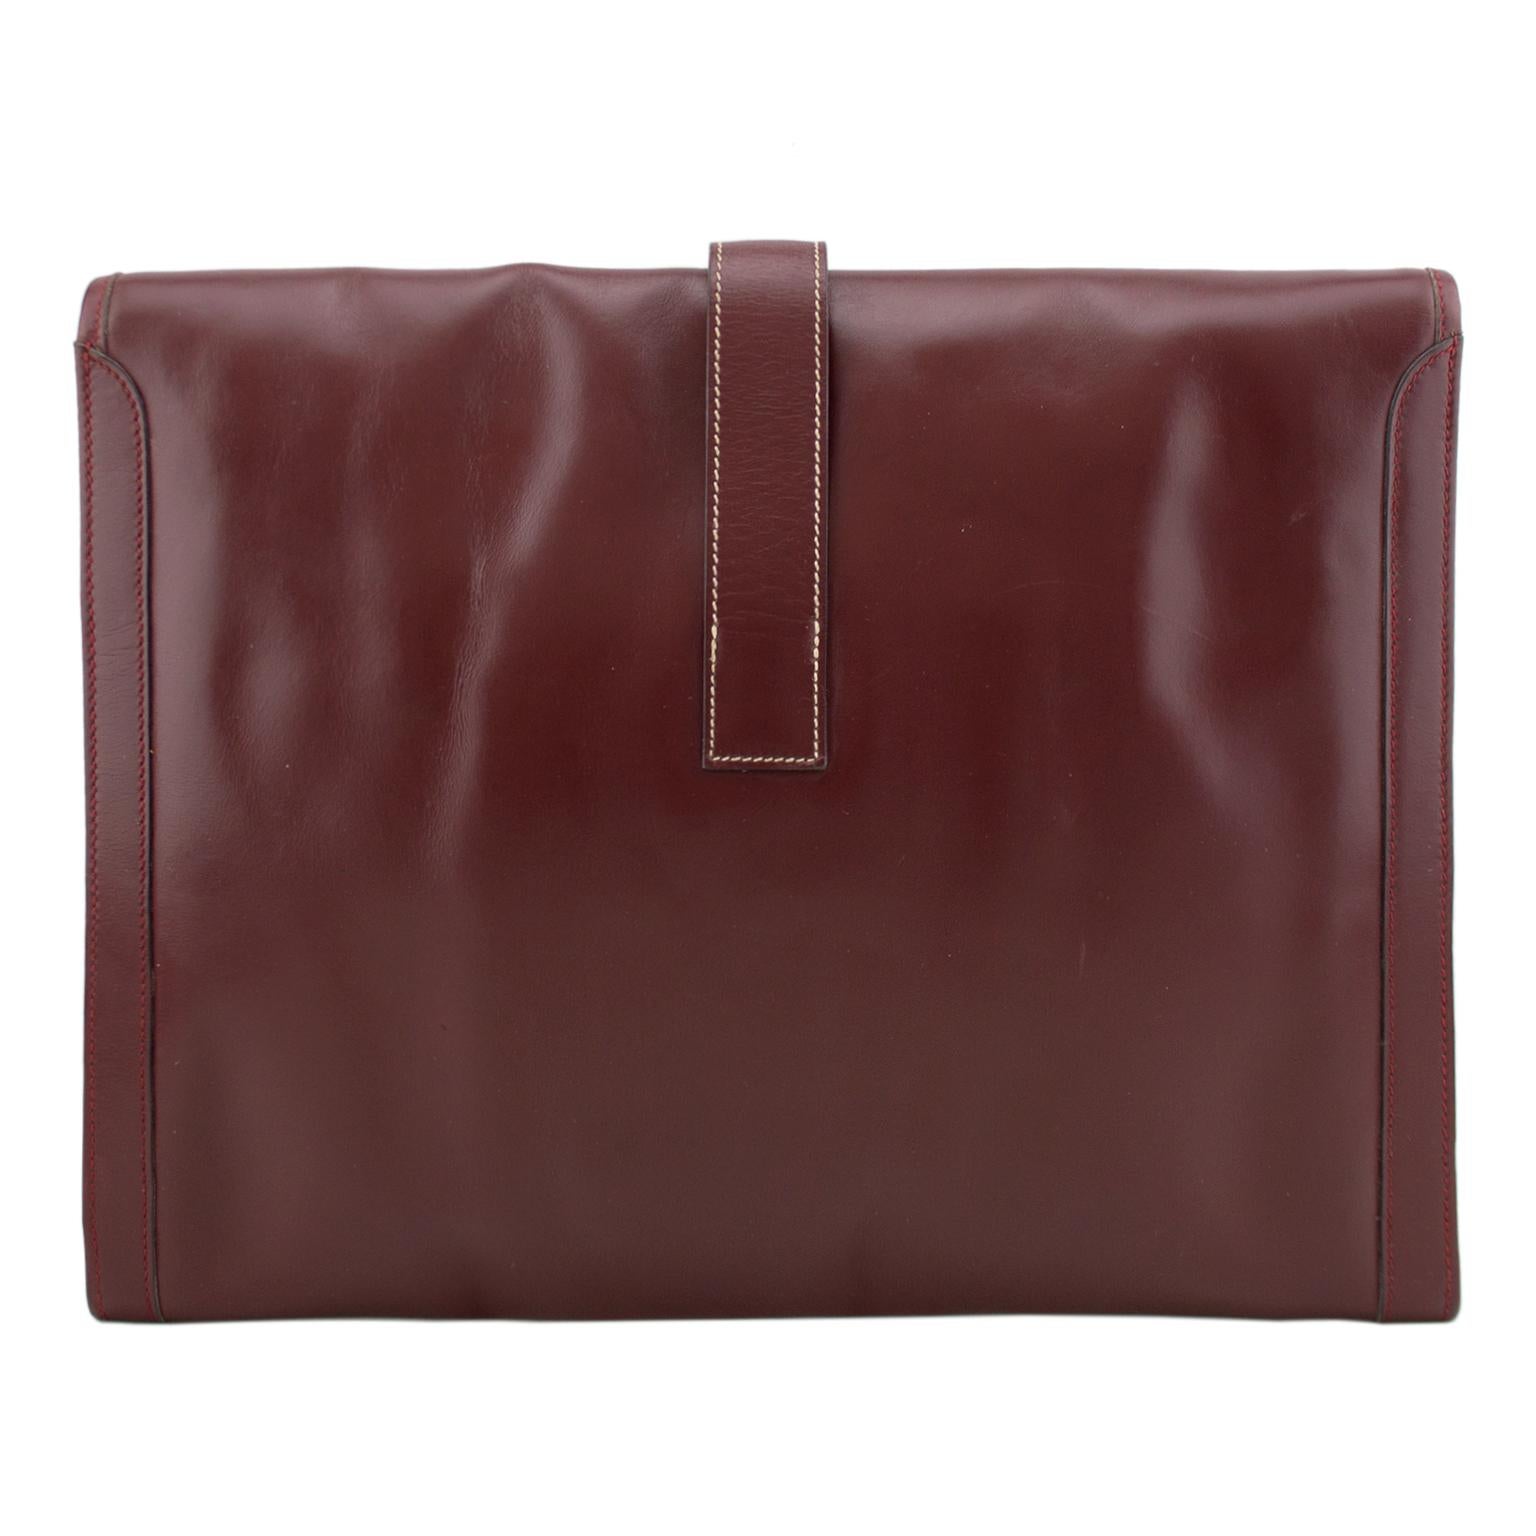 1977 Hermés Maroon Leather Jige Clutch  In Good Condition For Sale In Toronto, Ontario